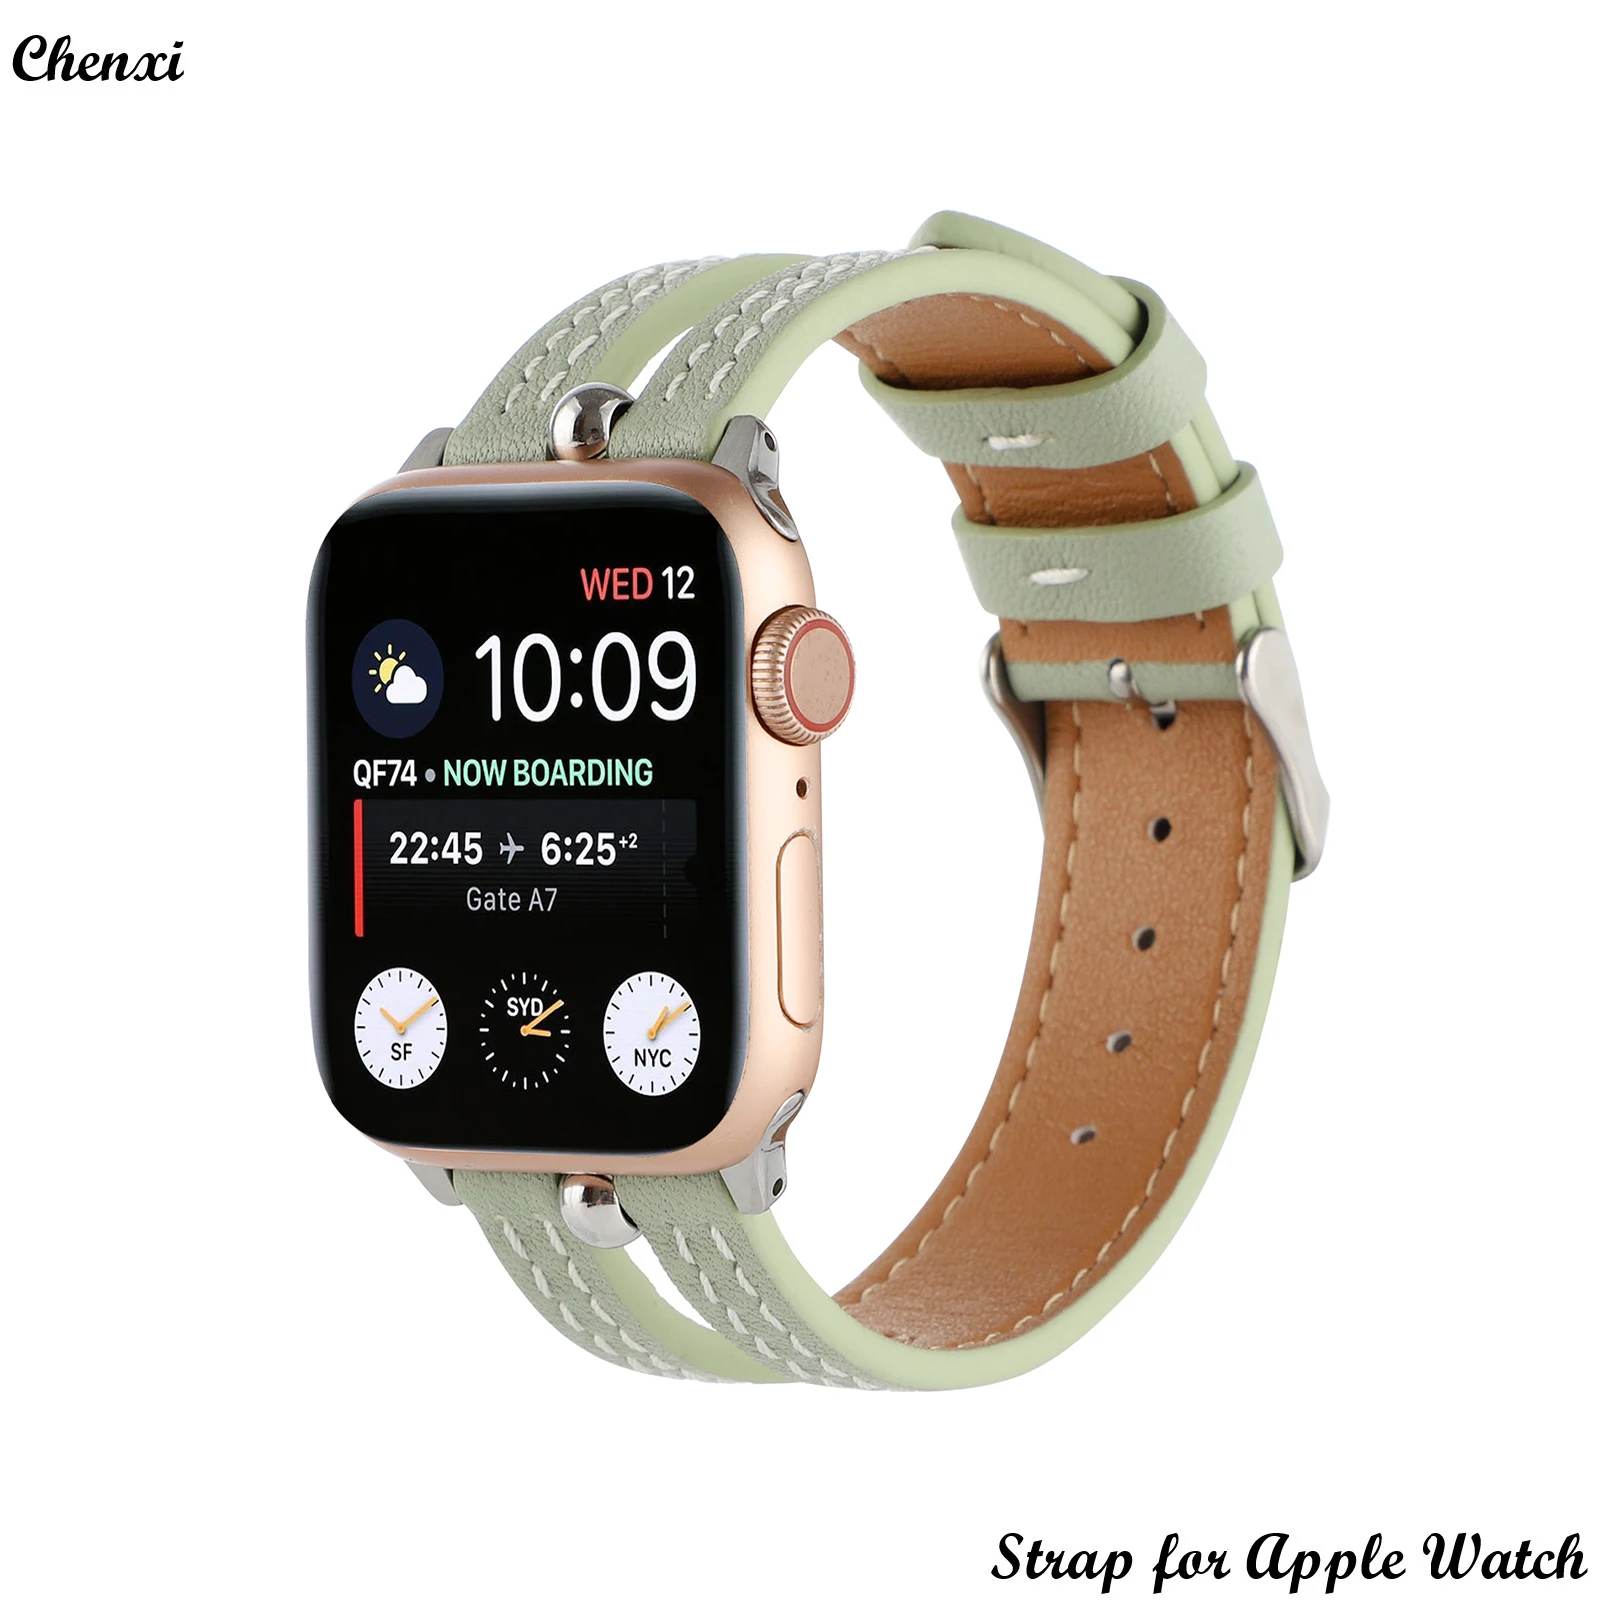 Enlarge Strap for Apple Watch bracelet chain band for iwatch87654321SE fasion Opened Genuine leather strap for Iwatch Ultra wrist